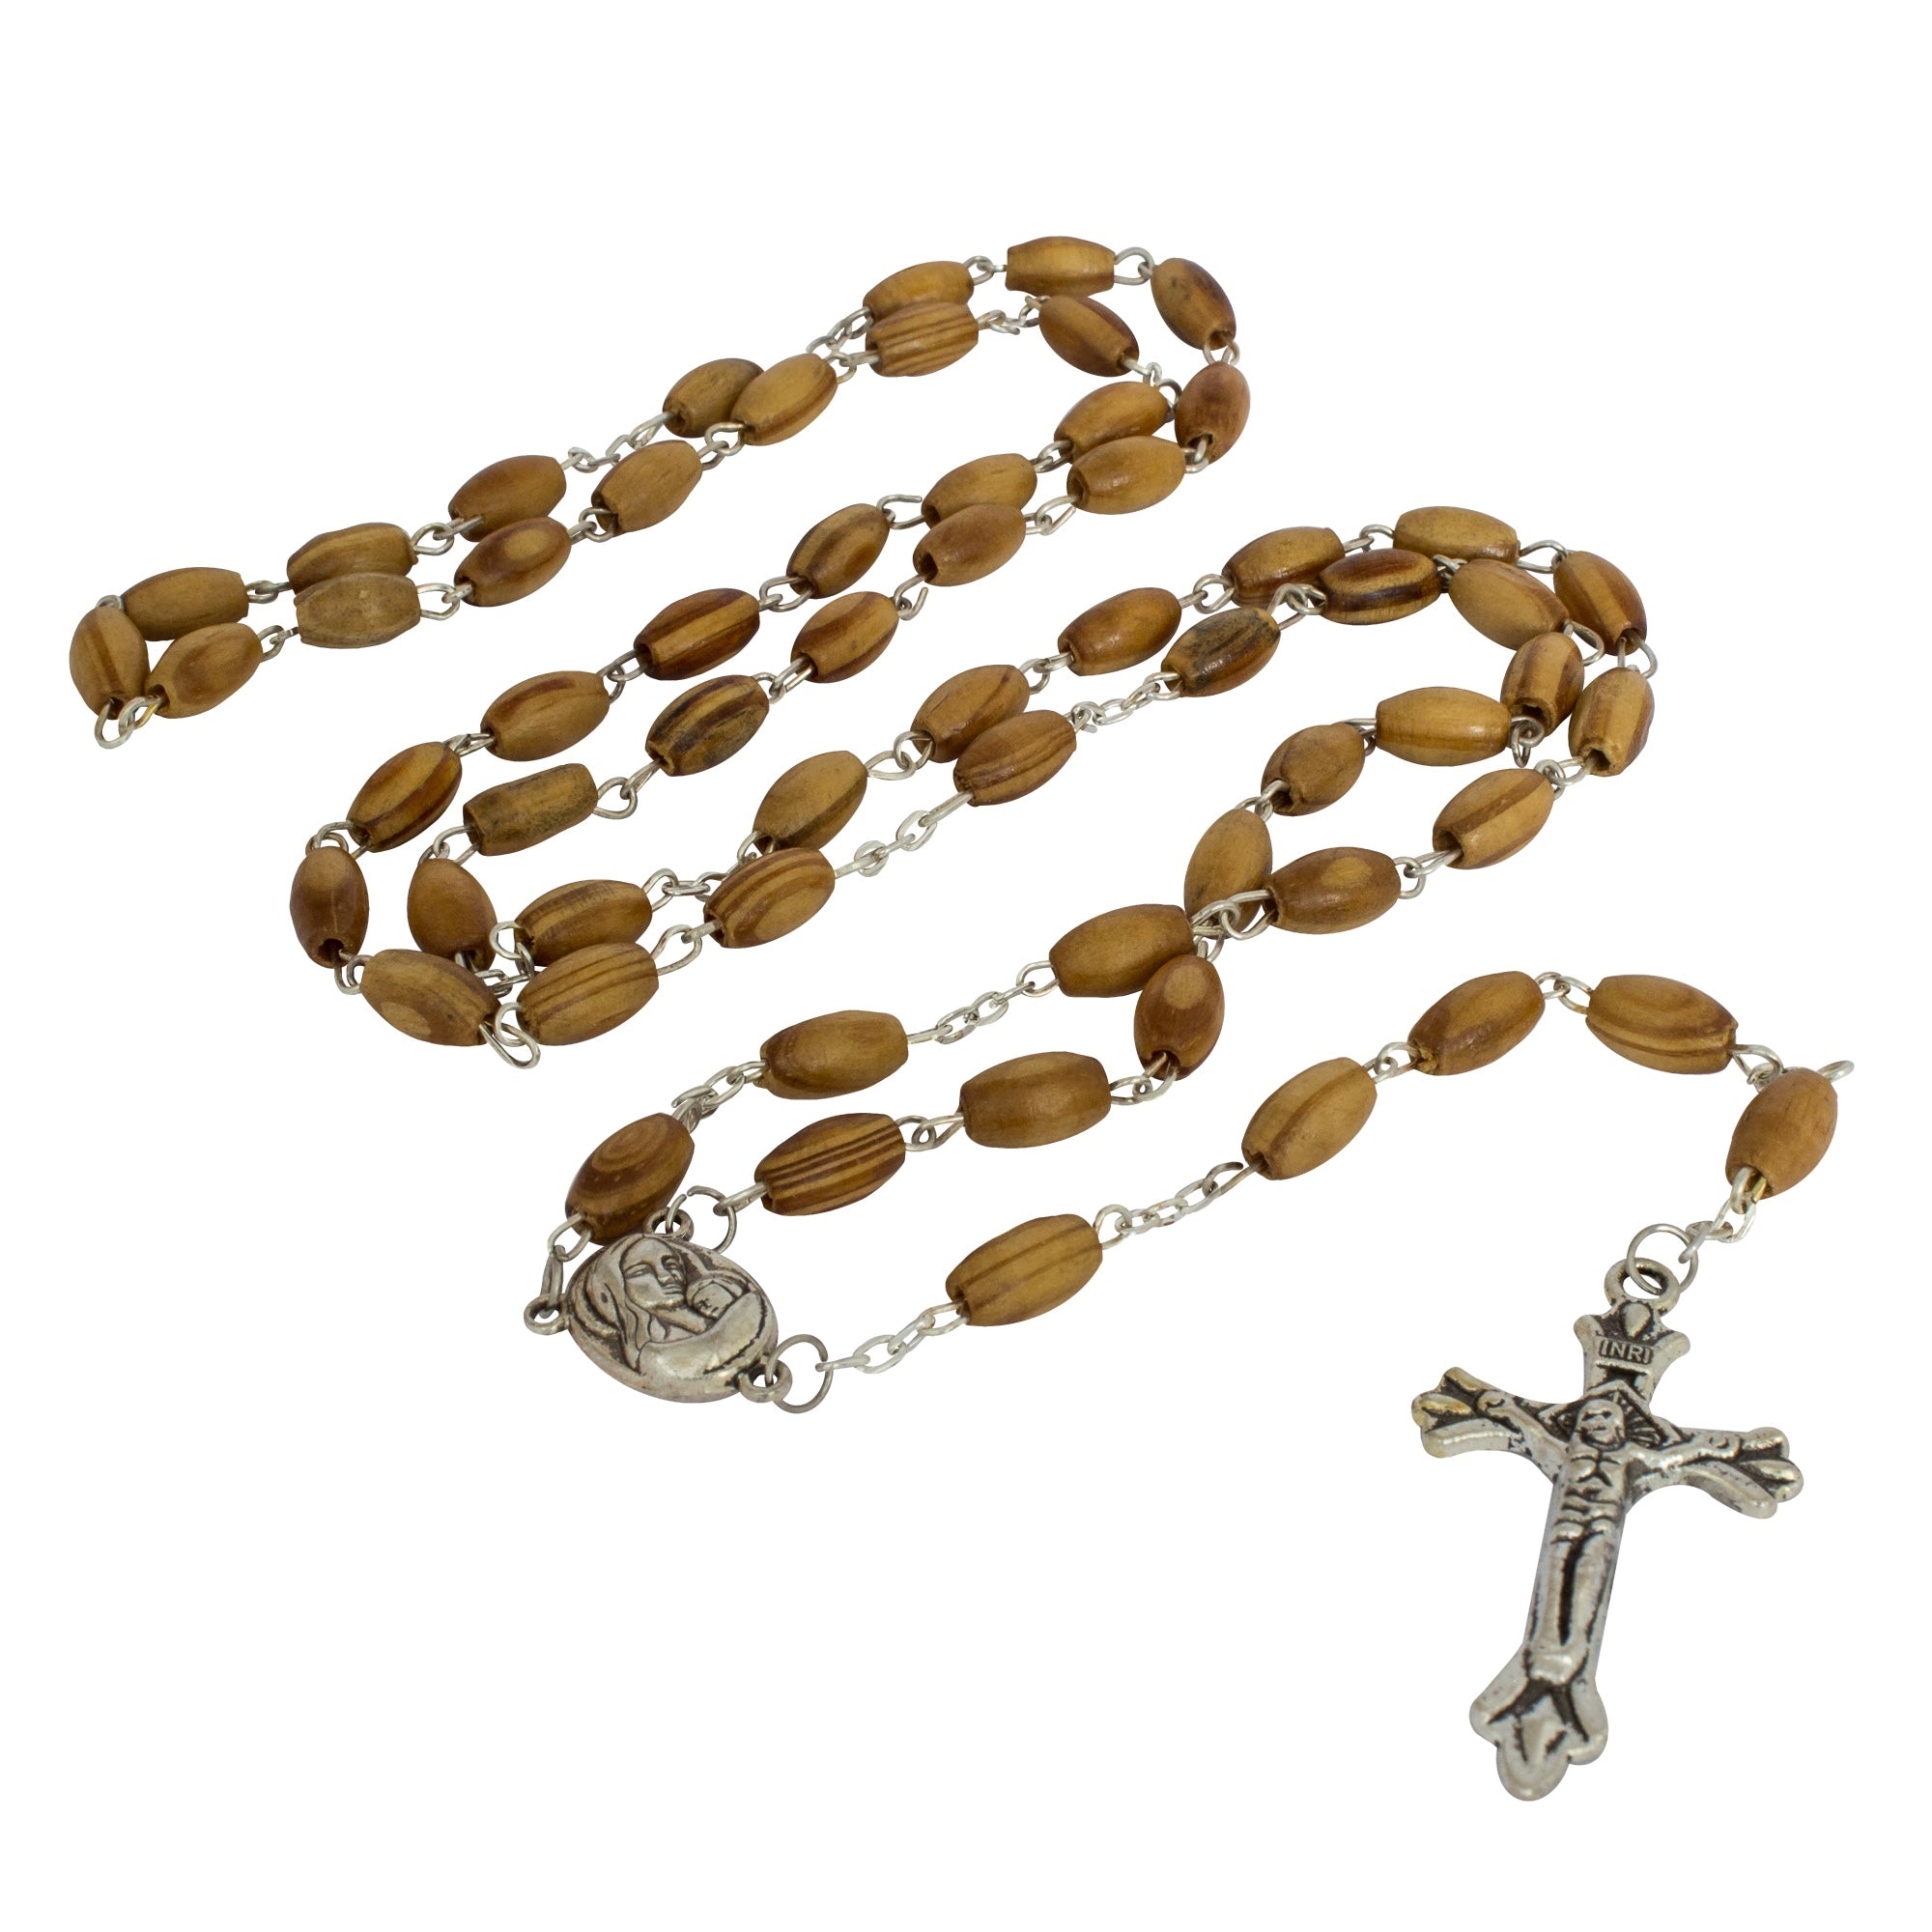 Prayer Beads, 100 olive wood beads with cross - Ancient Faith Store